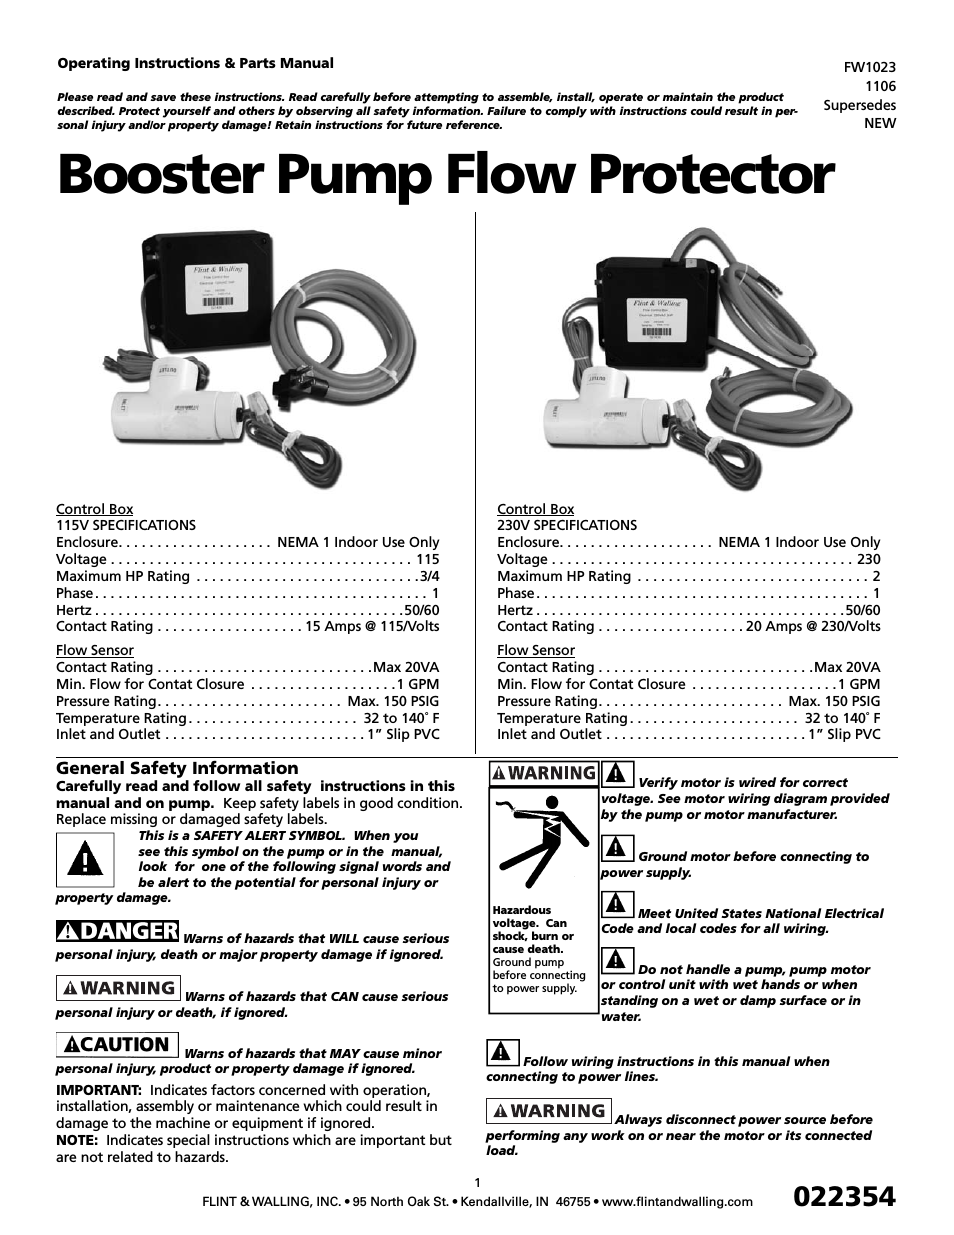 Booster Pump Flow Protector Instructions